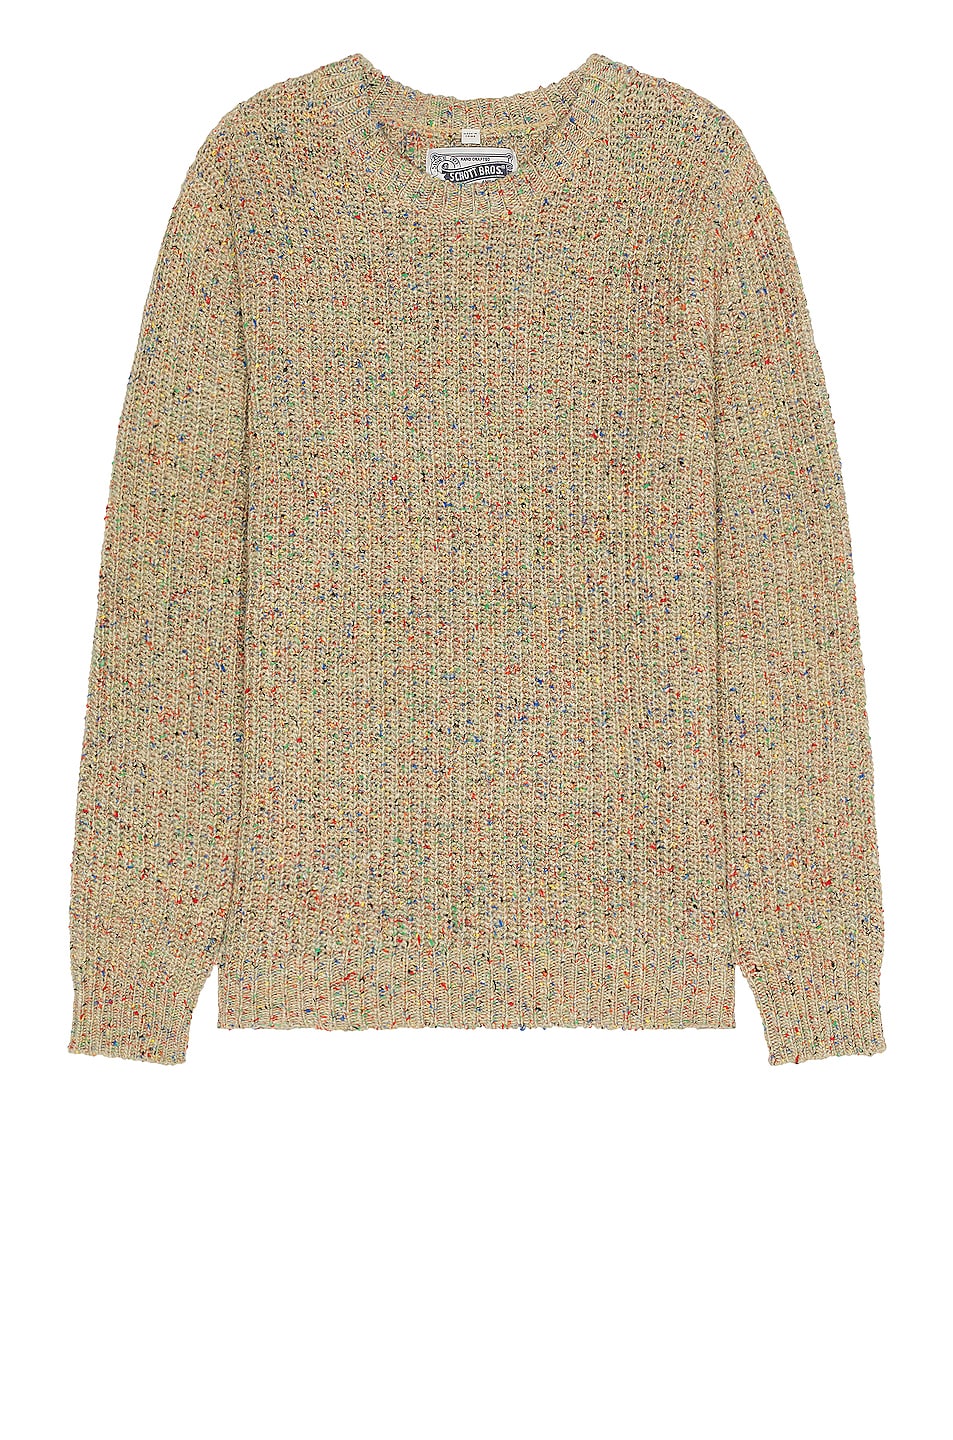 Image 1 of Schott Donegal Sweater in Tan